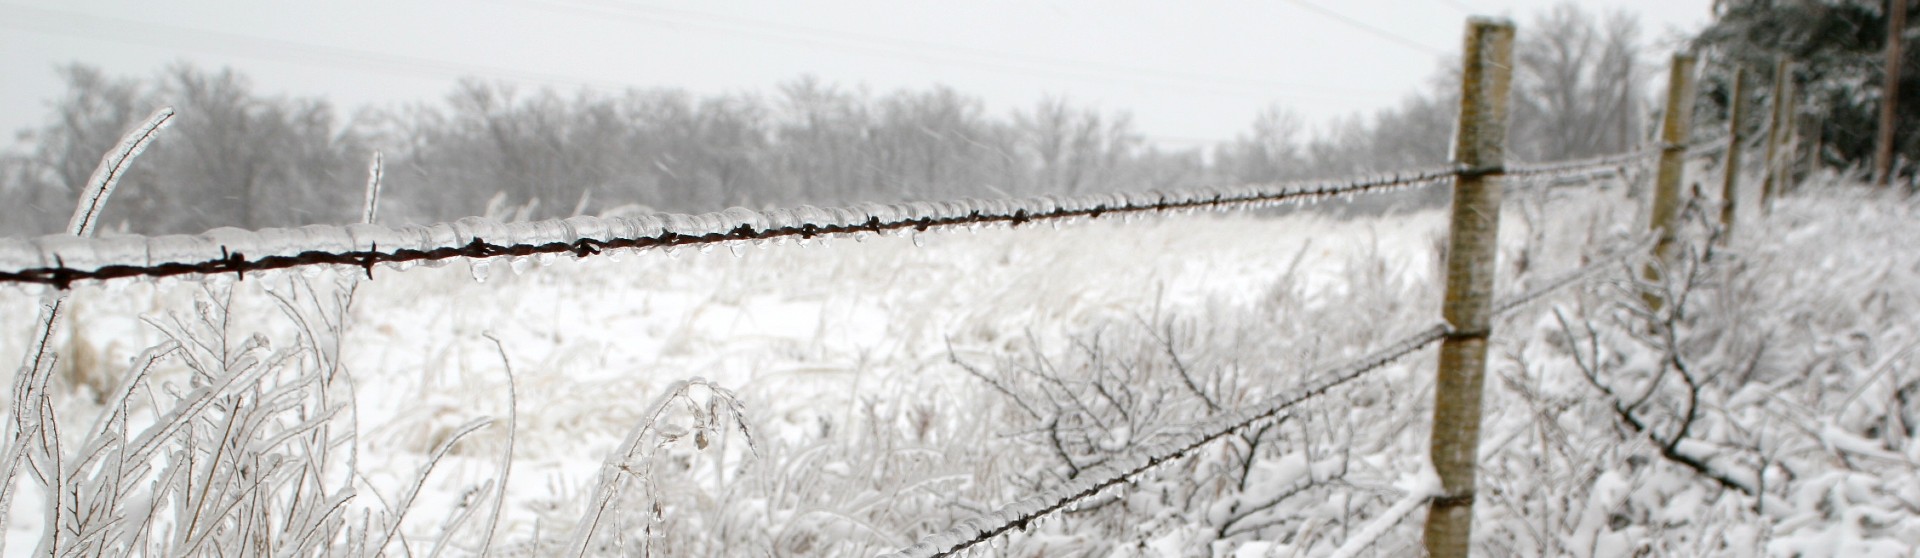 Old barbed wire fence with frozen pasture in background.